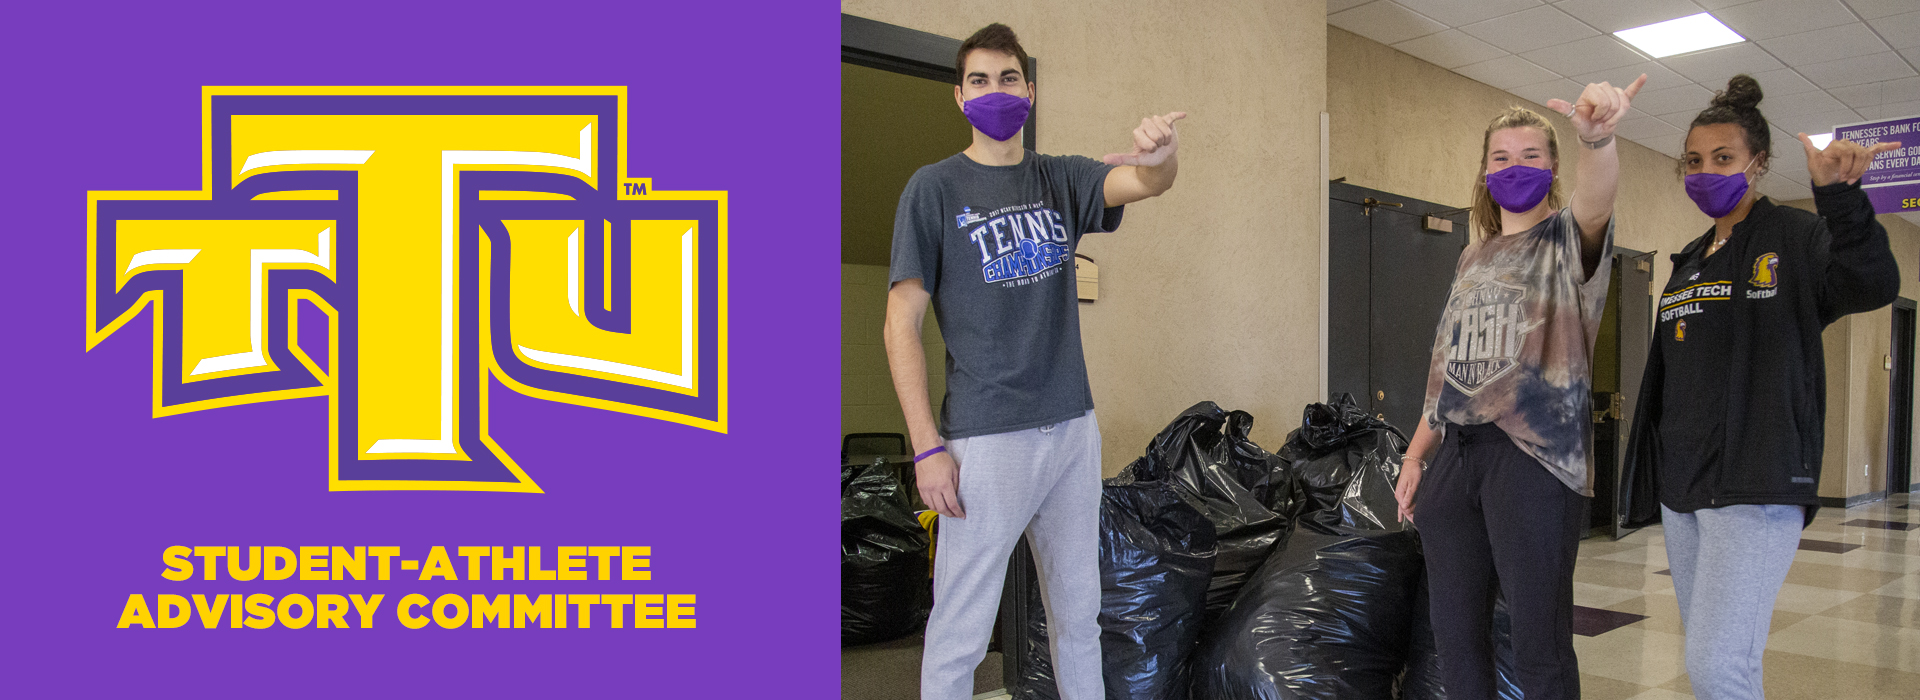 Tech student-athletes donate 1,077 items for SAAC clothing drive